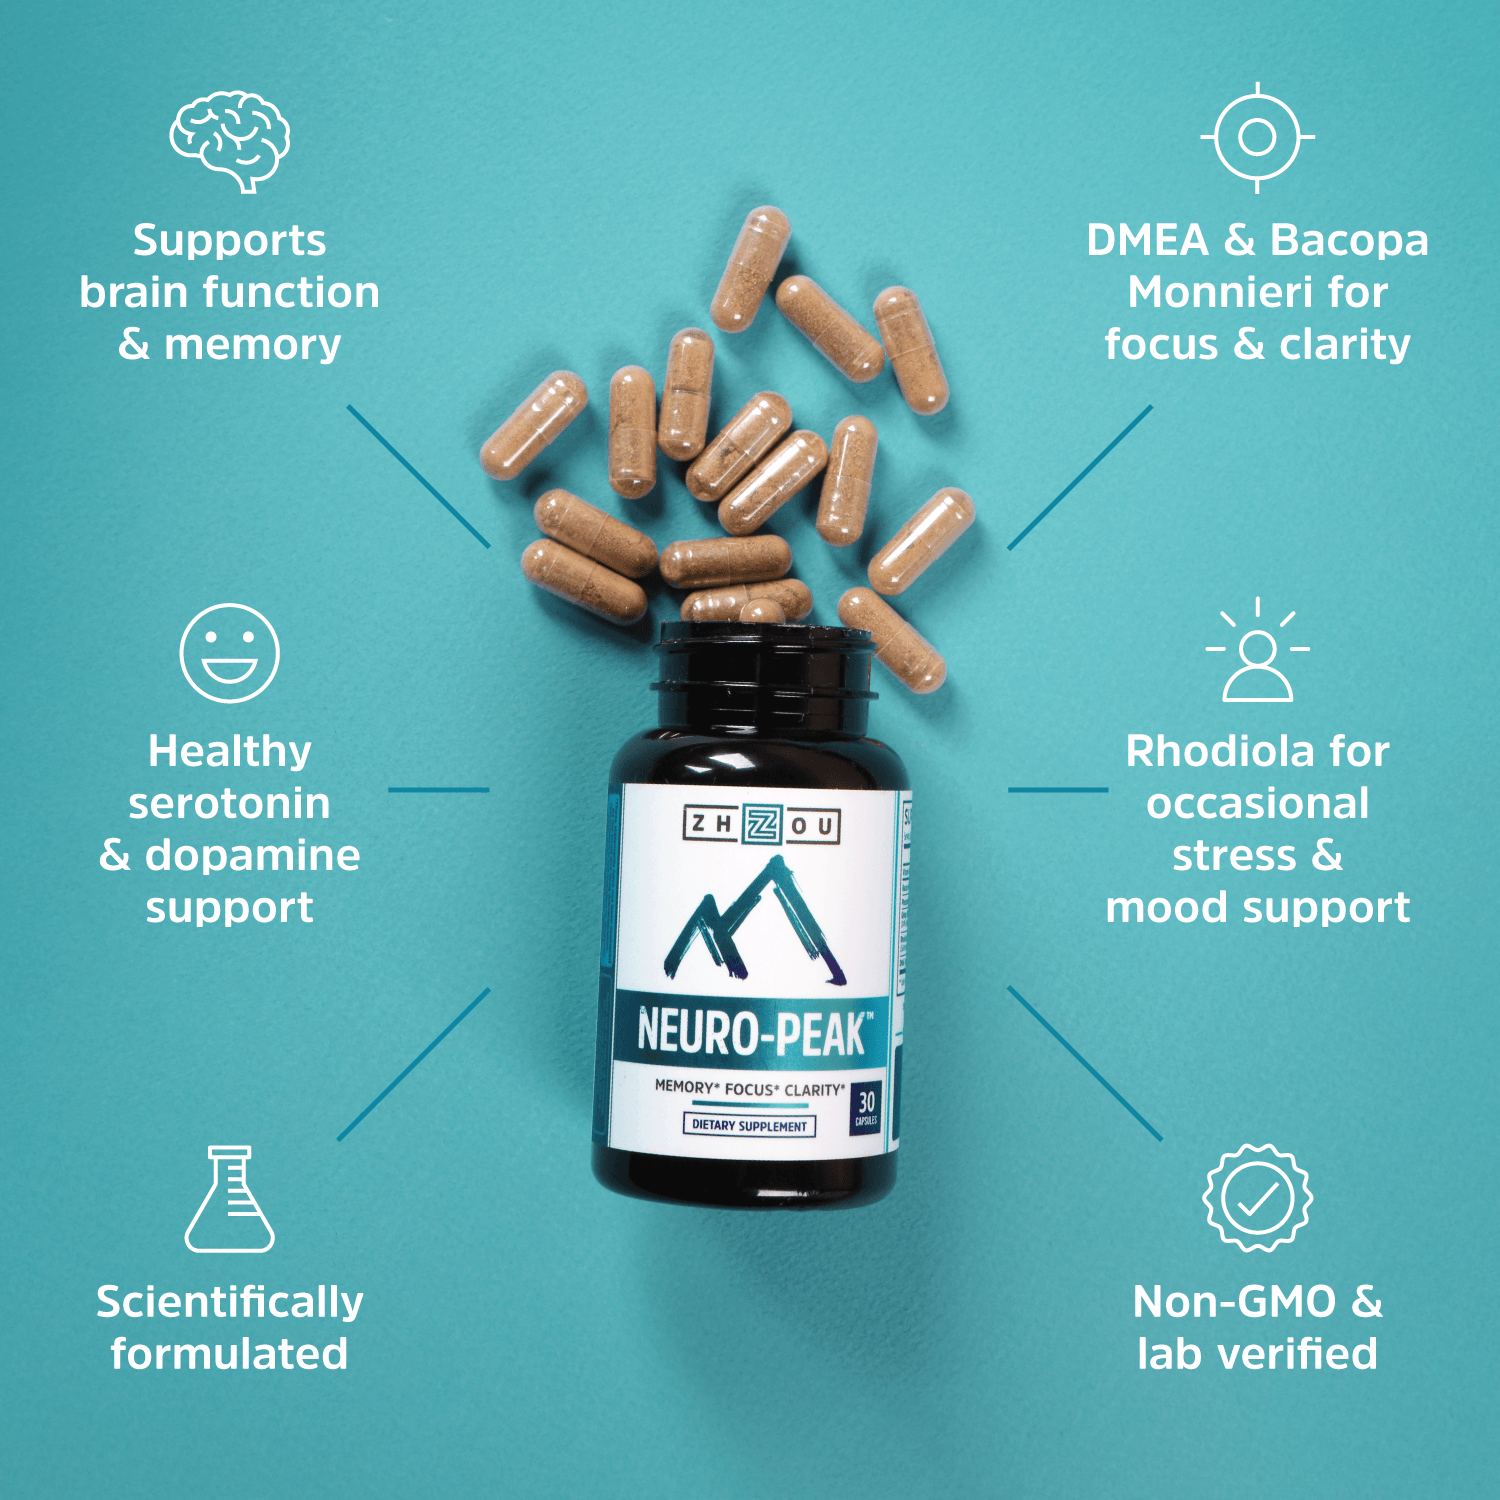 Supports brain function and memory. Healthy serotonin and dopamine support. Scientifically formulated. DMEA and Bacopa Monneri for focus and clarity. Rhodiola for occasional stress and mood support. Non-GMO and lab verified.